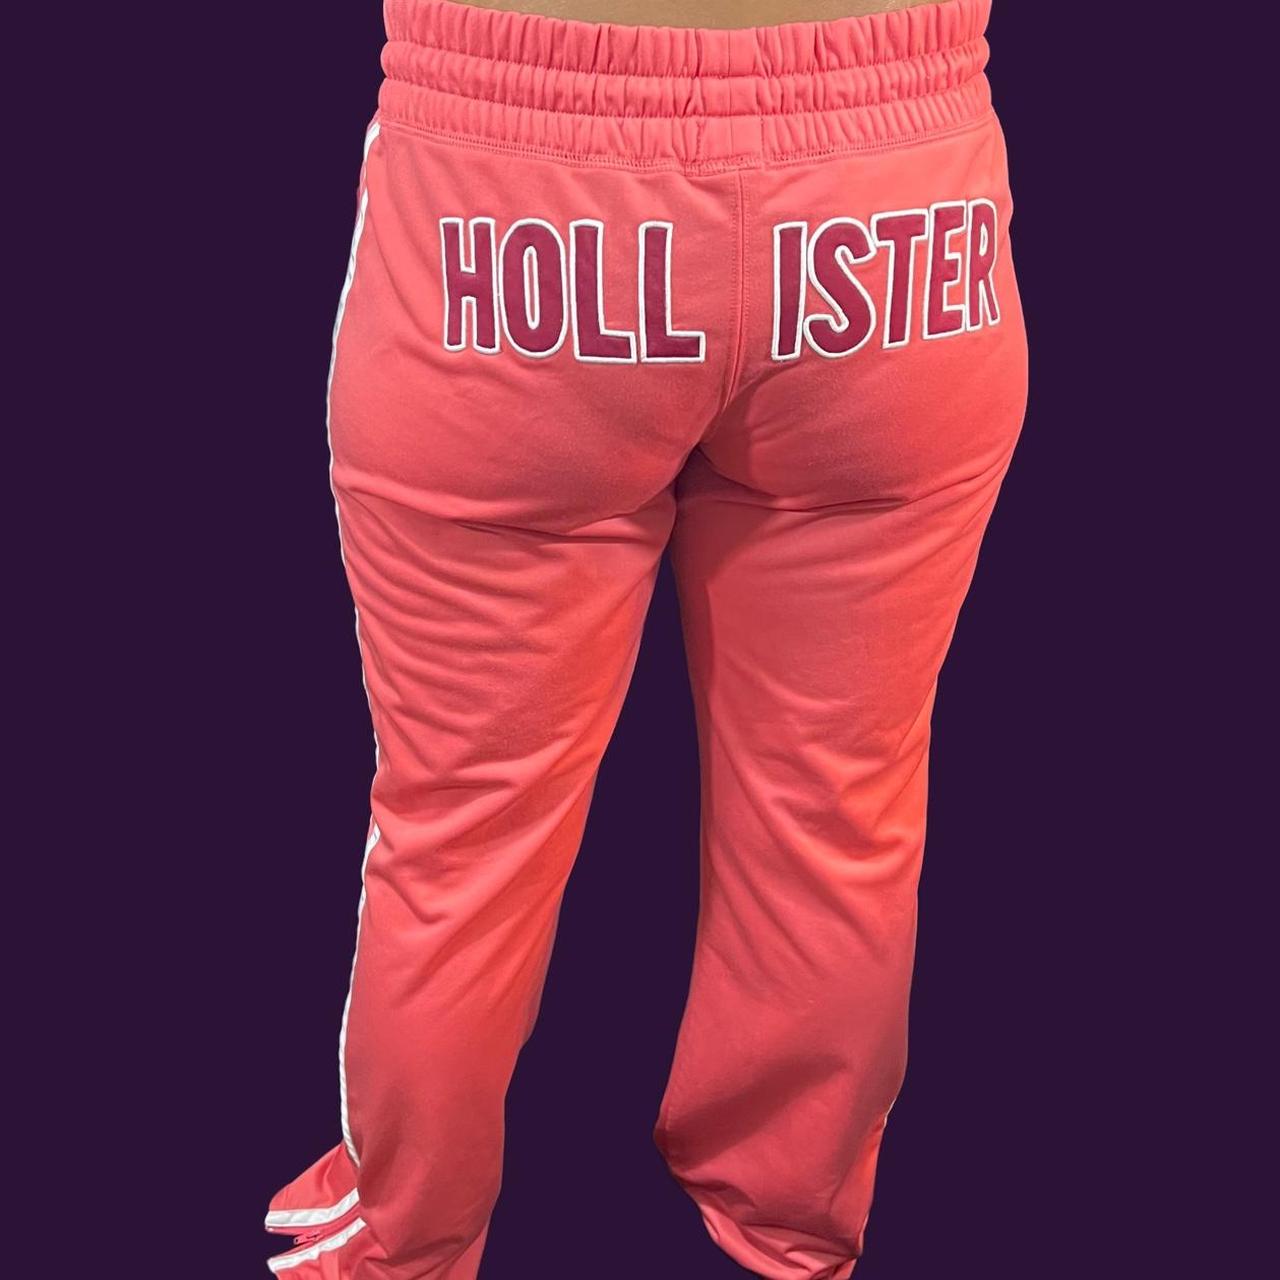 Hollister Y2k 2000s Vintage Tight Fitted Pink Zip Up